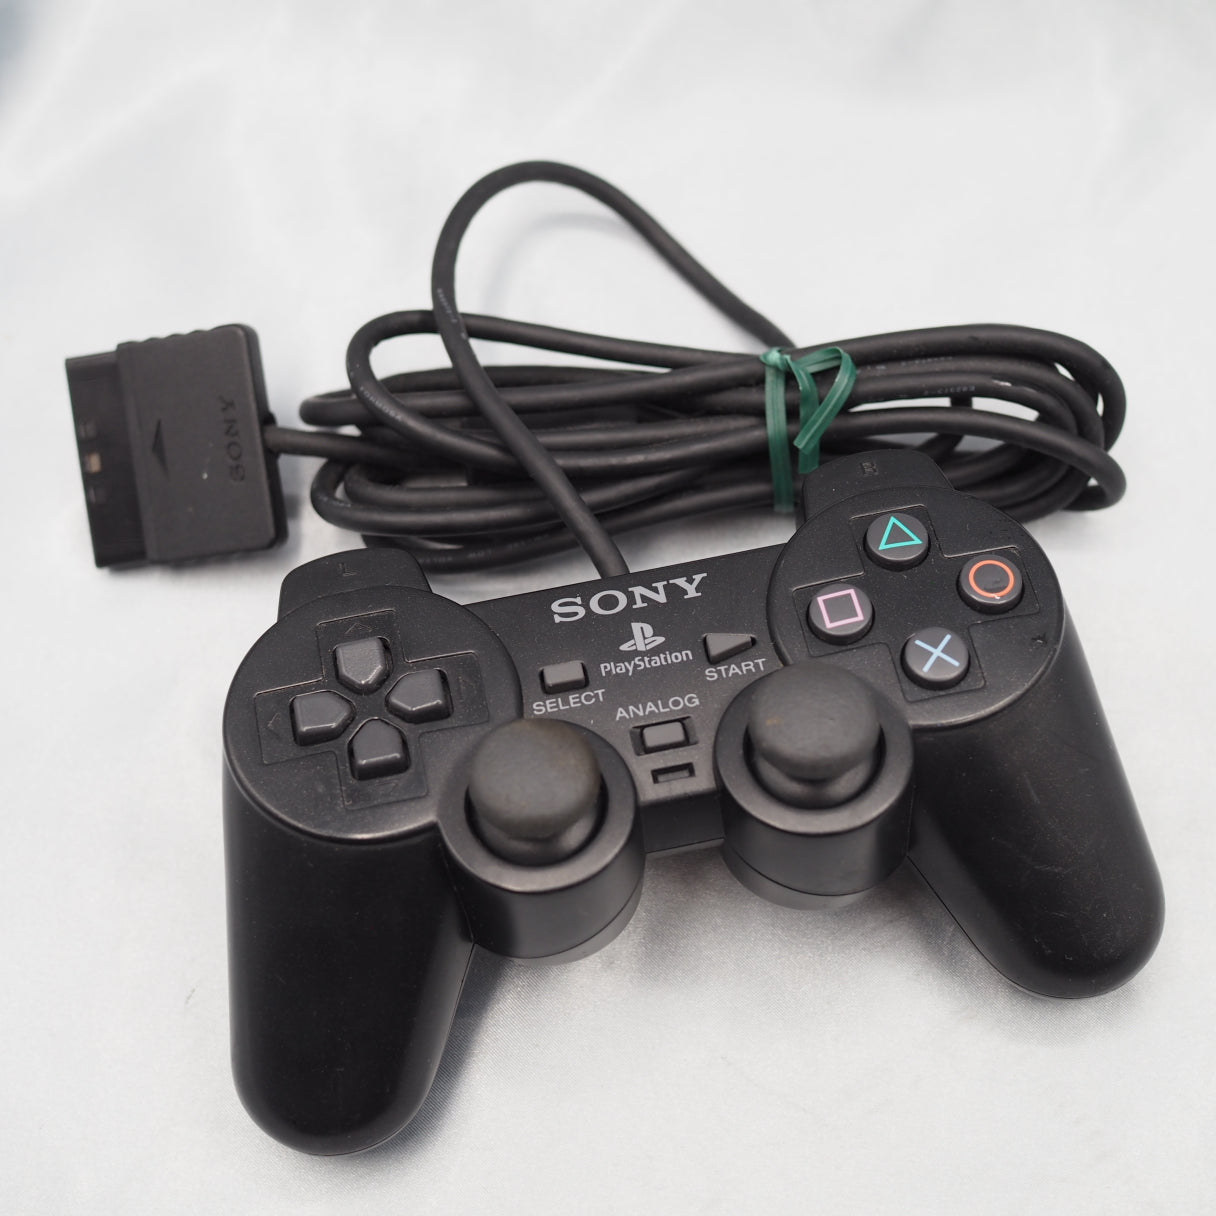 Sony PlayStation2 SCPH-30000 Boxed [Black] [Serial number match]